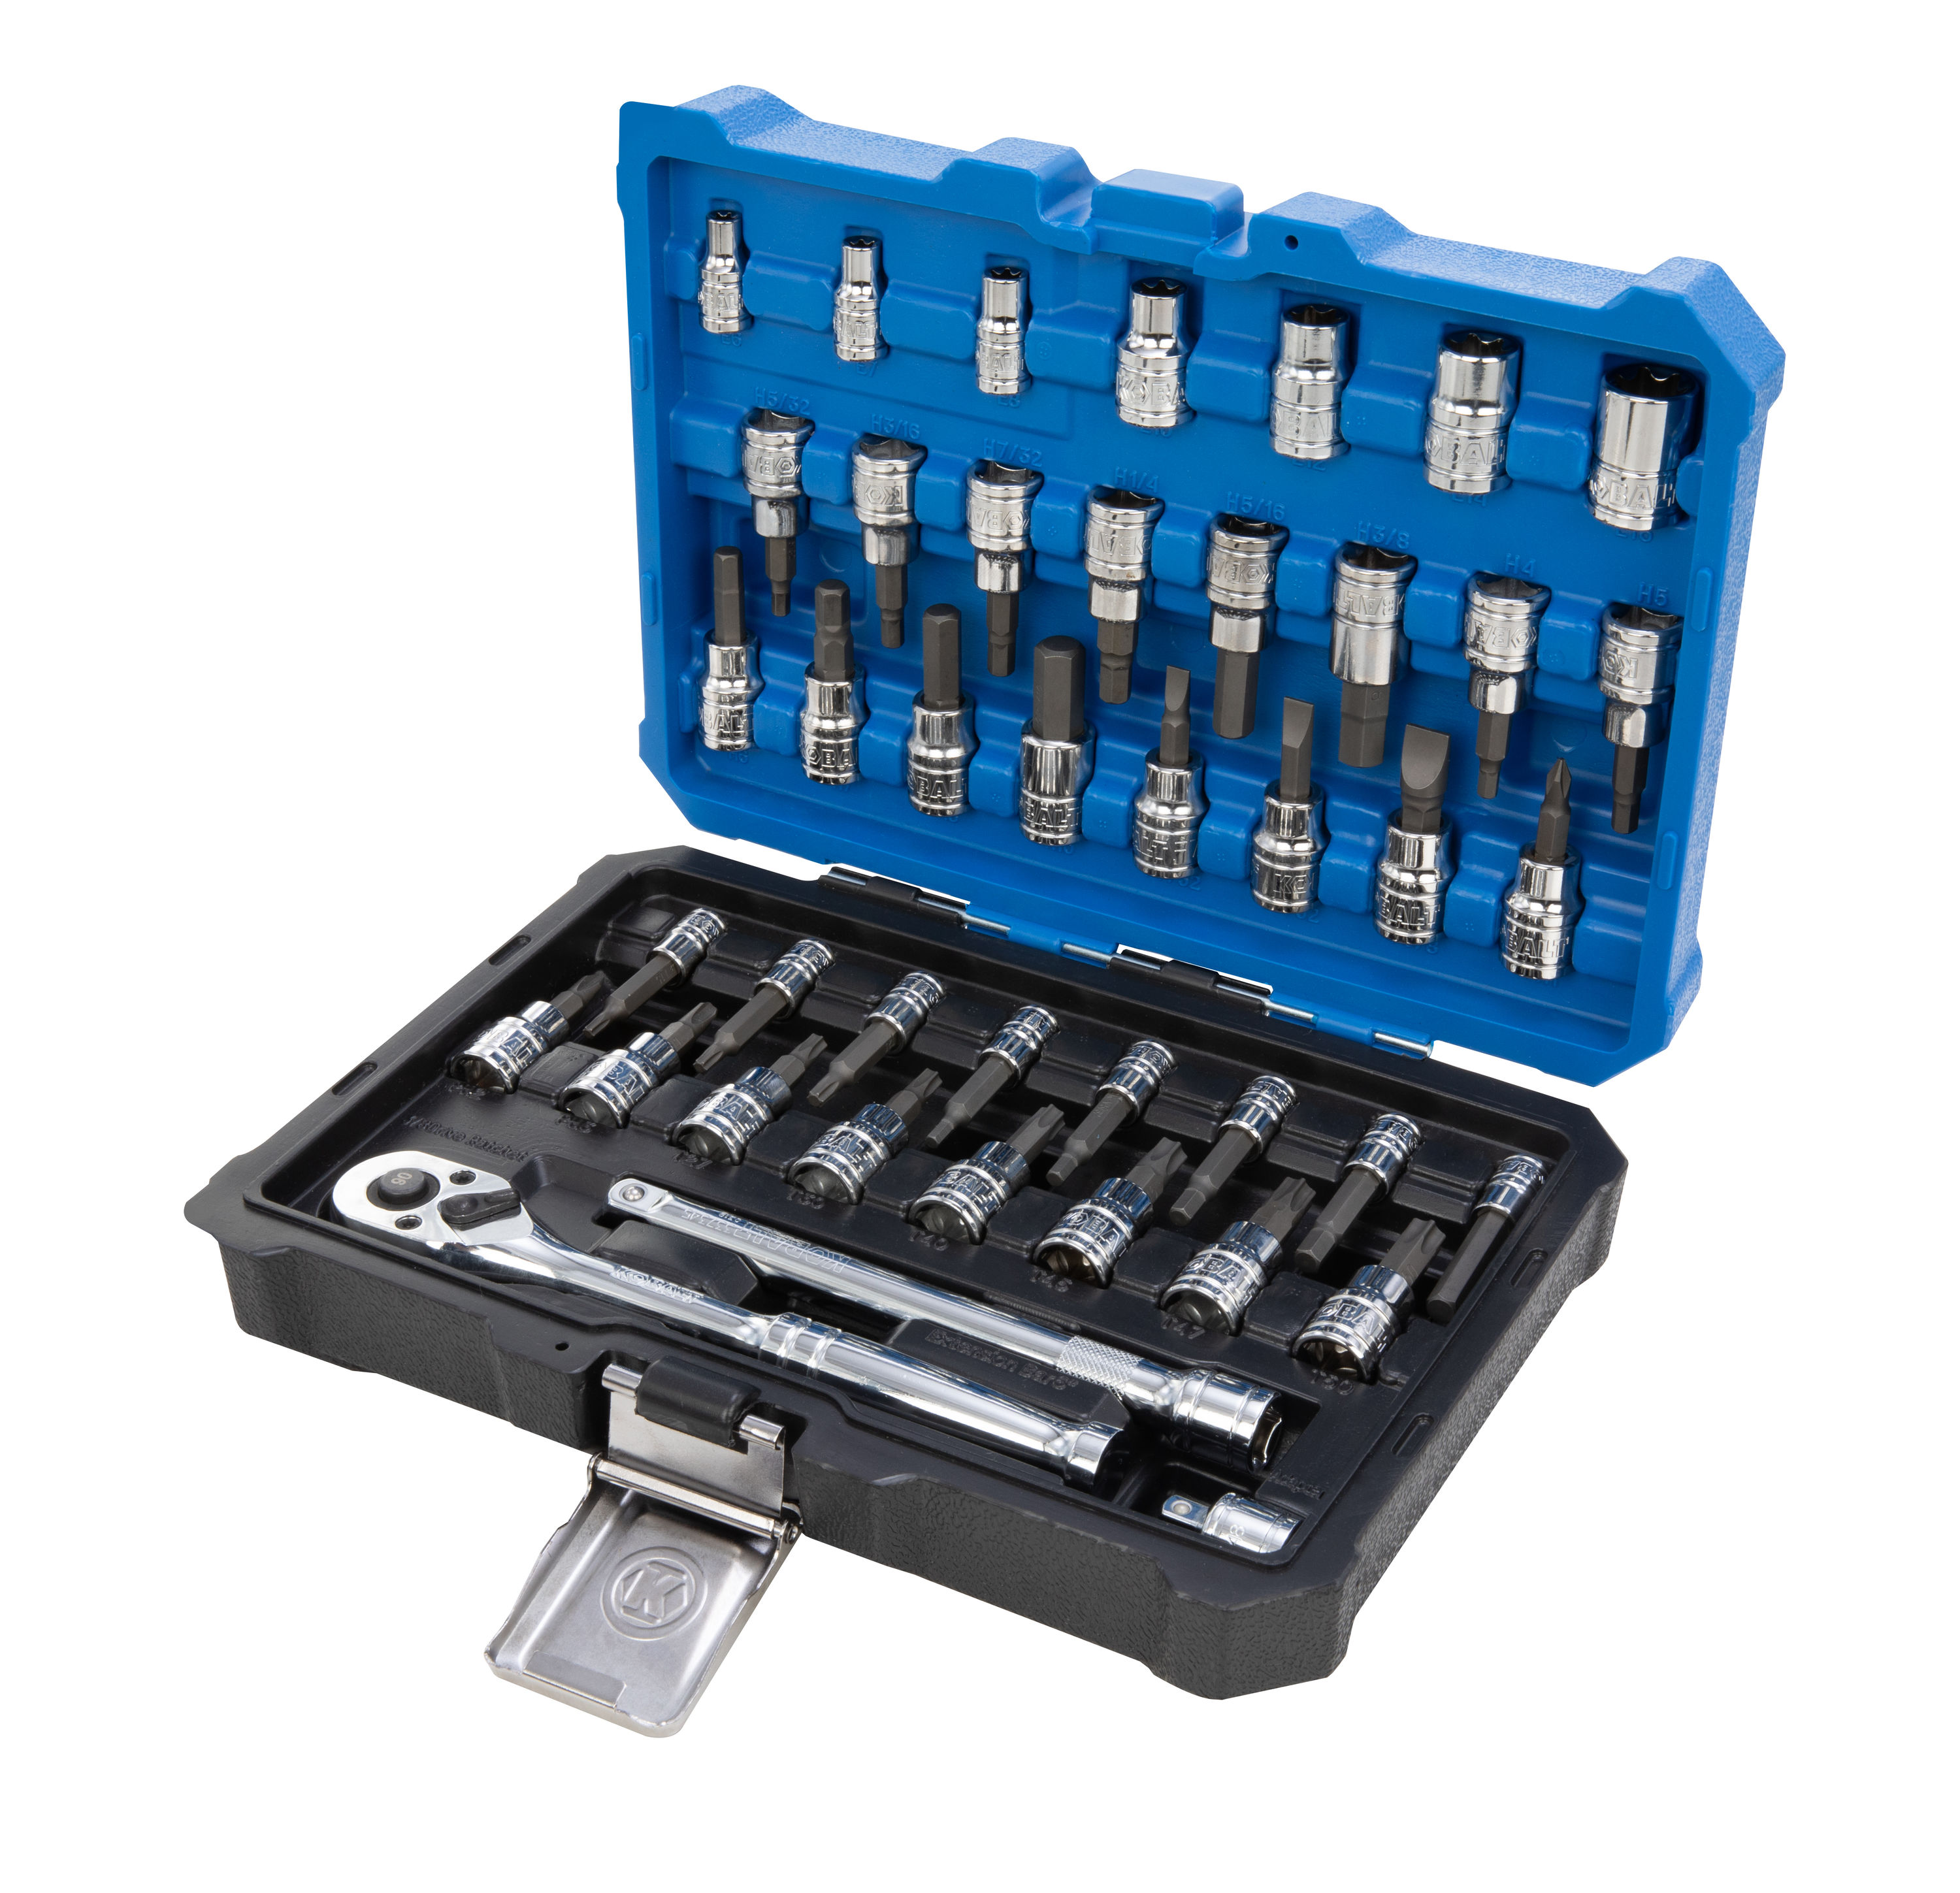 Craftsman  42 piece 1/4 and 3/8-inch Drive Bit and Torx Bit Socket Wrench Set 